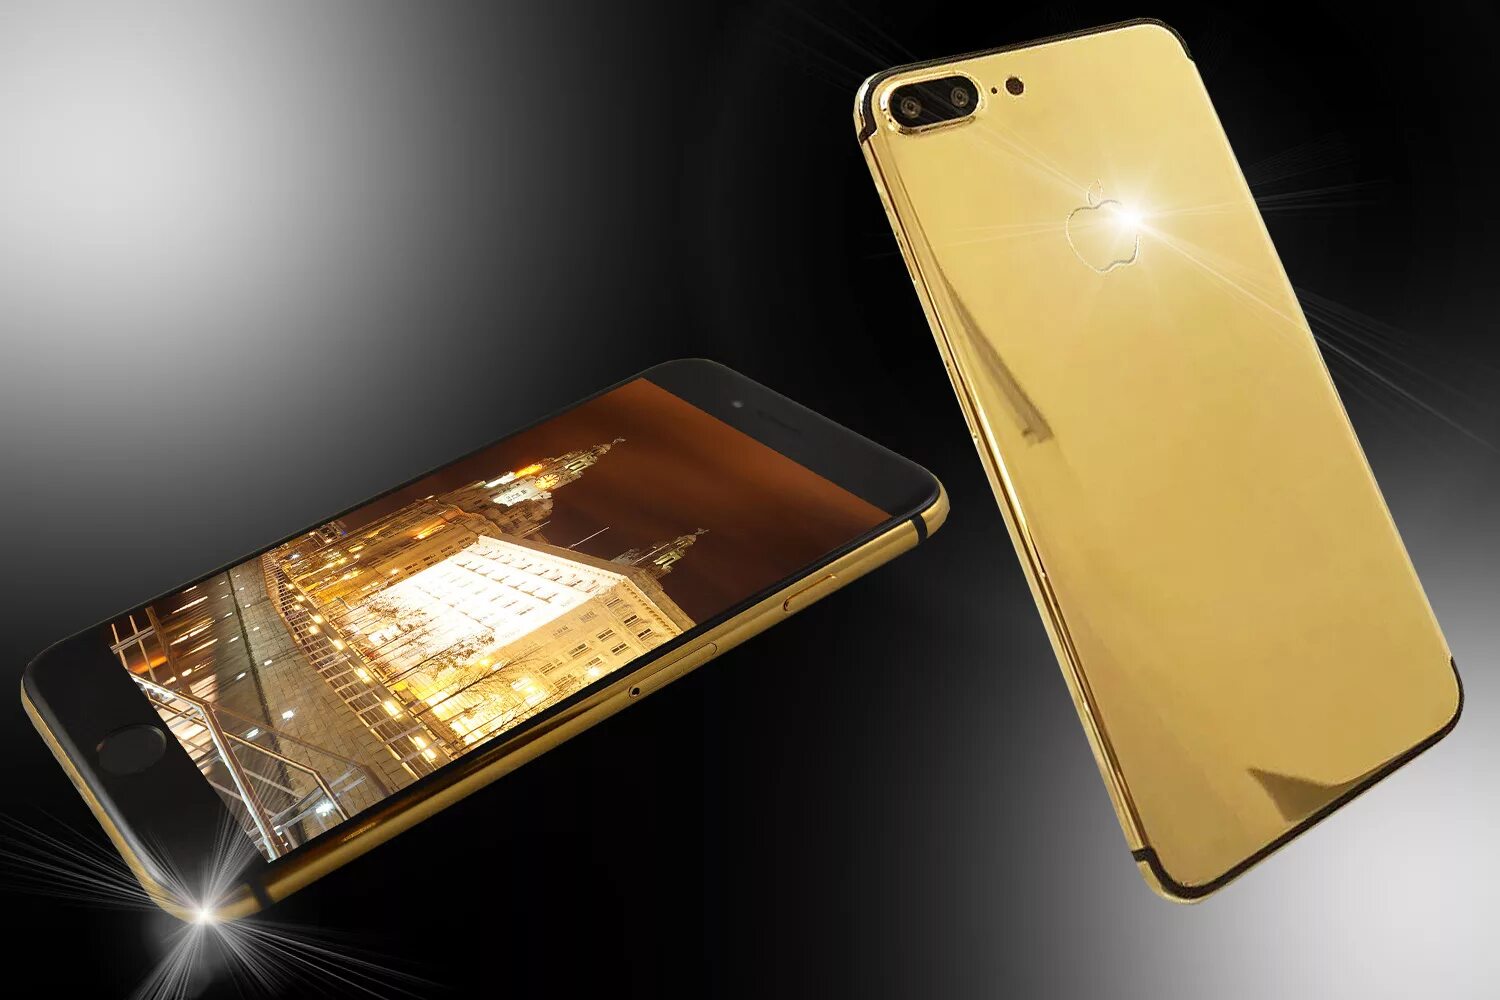 Gold mobile. Iphone 8 Plus Gold. Iphone 8 золотой. Iphone 8 Plus 24k Gold. Золотистый смартфон.